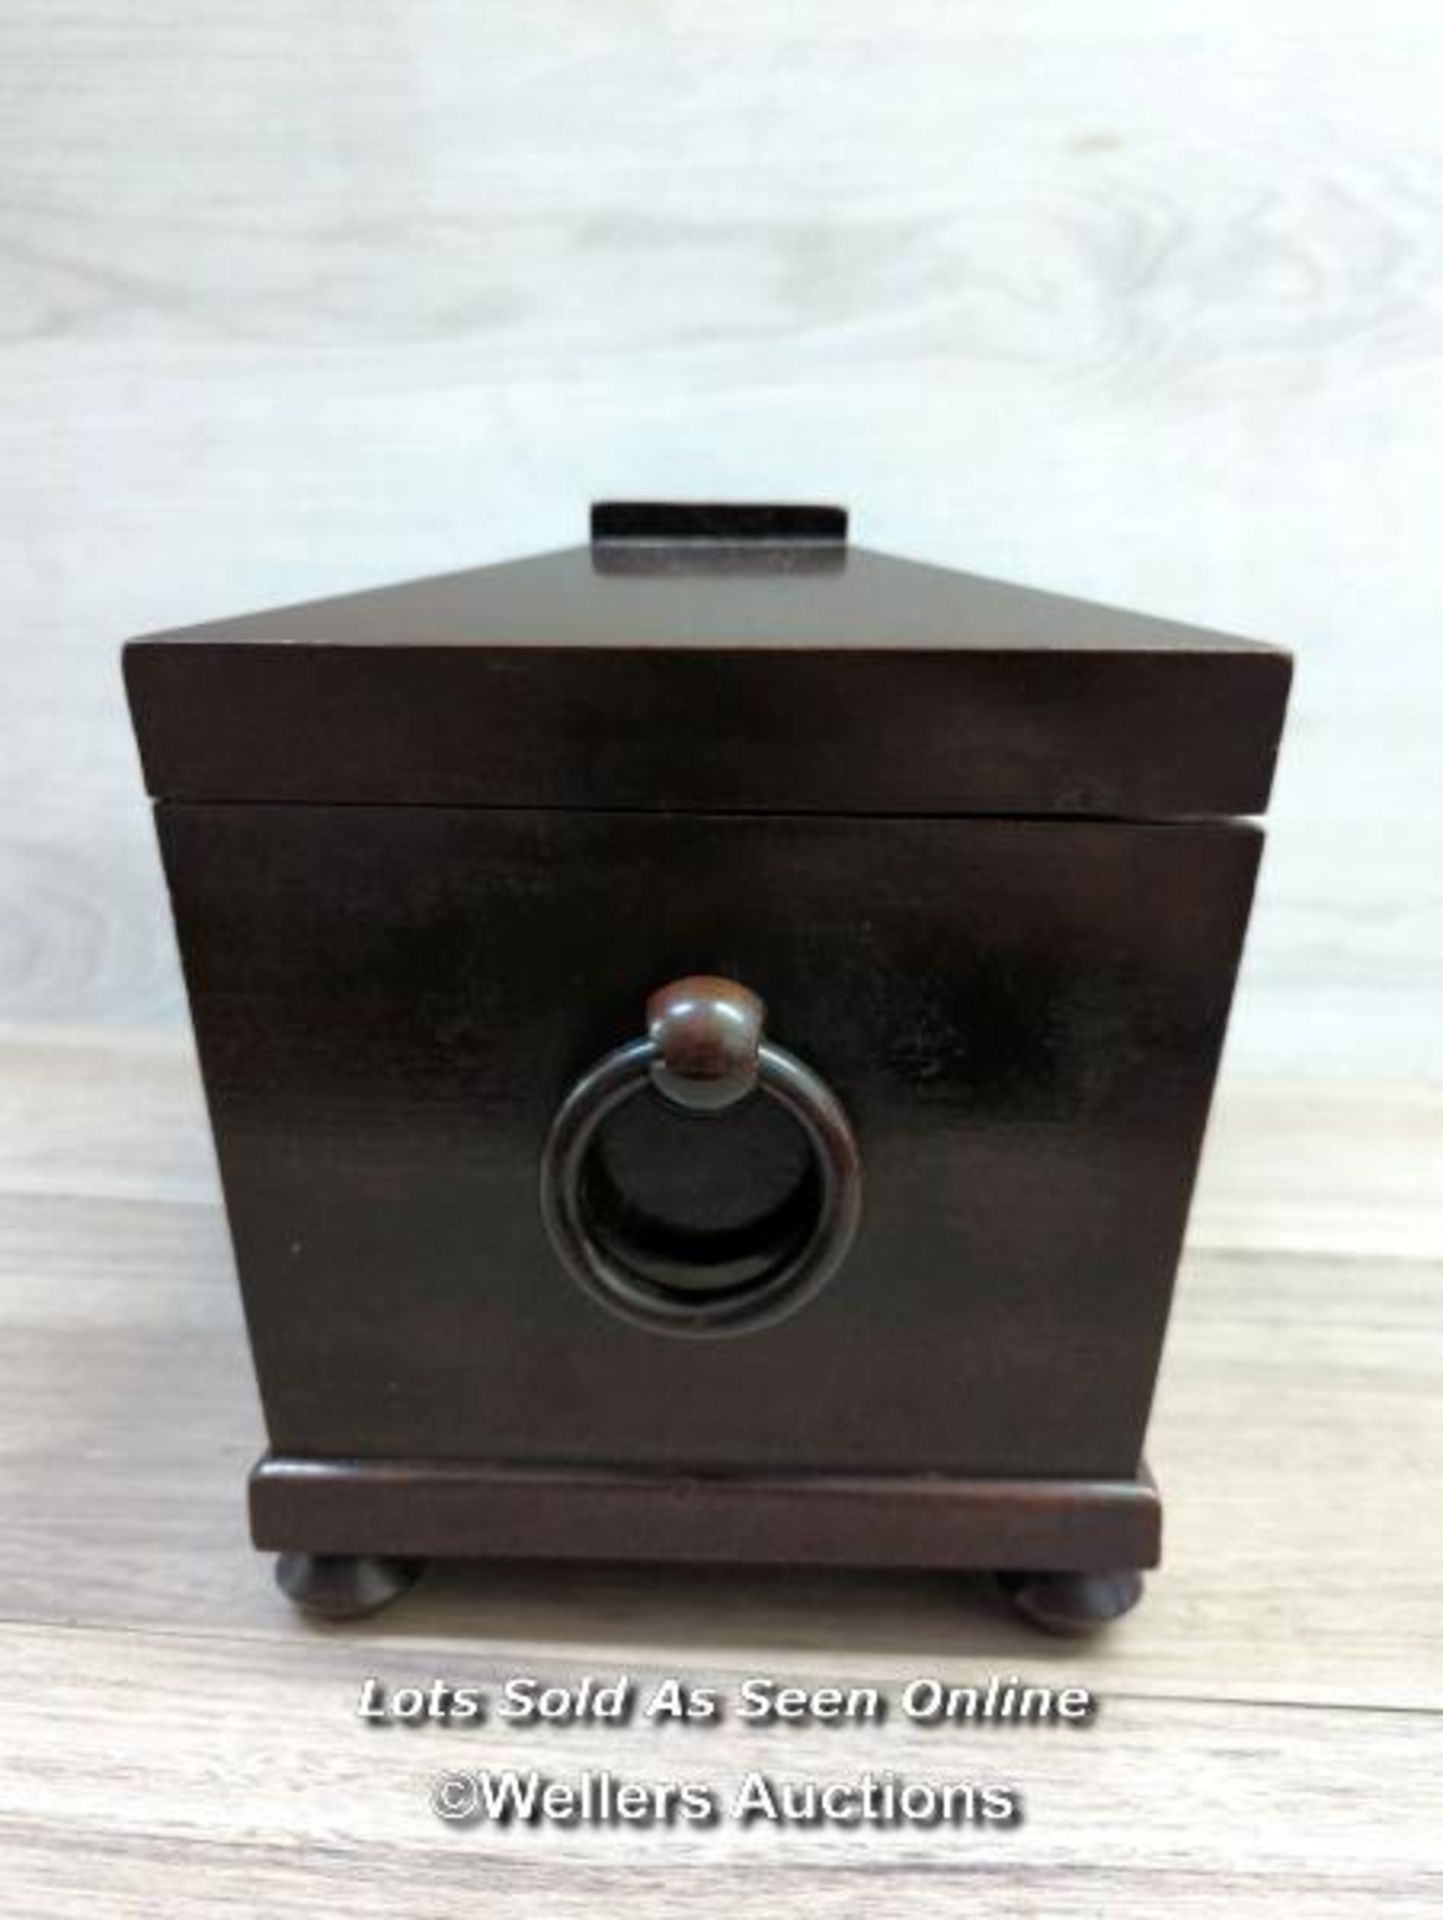 *ANTIQUE REGENCY MAHOGANY SARCOPHAGUS TEA CADDY - 3 CADDIES IN STUNNING CONDITION - Image 5 of 8